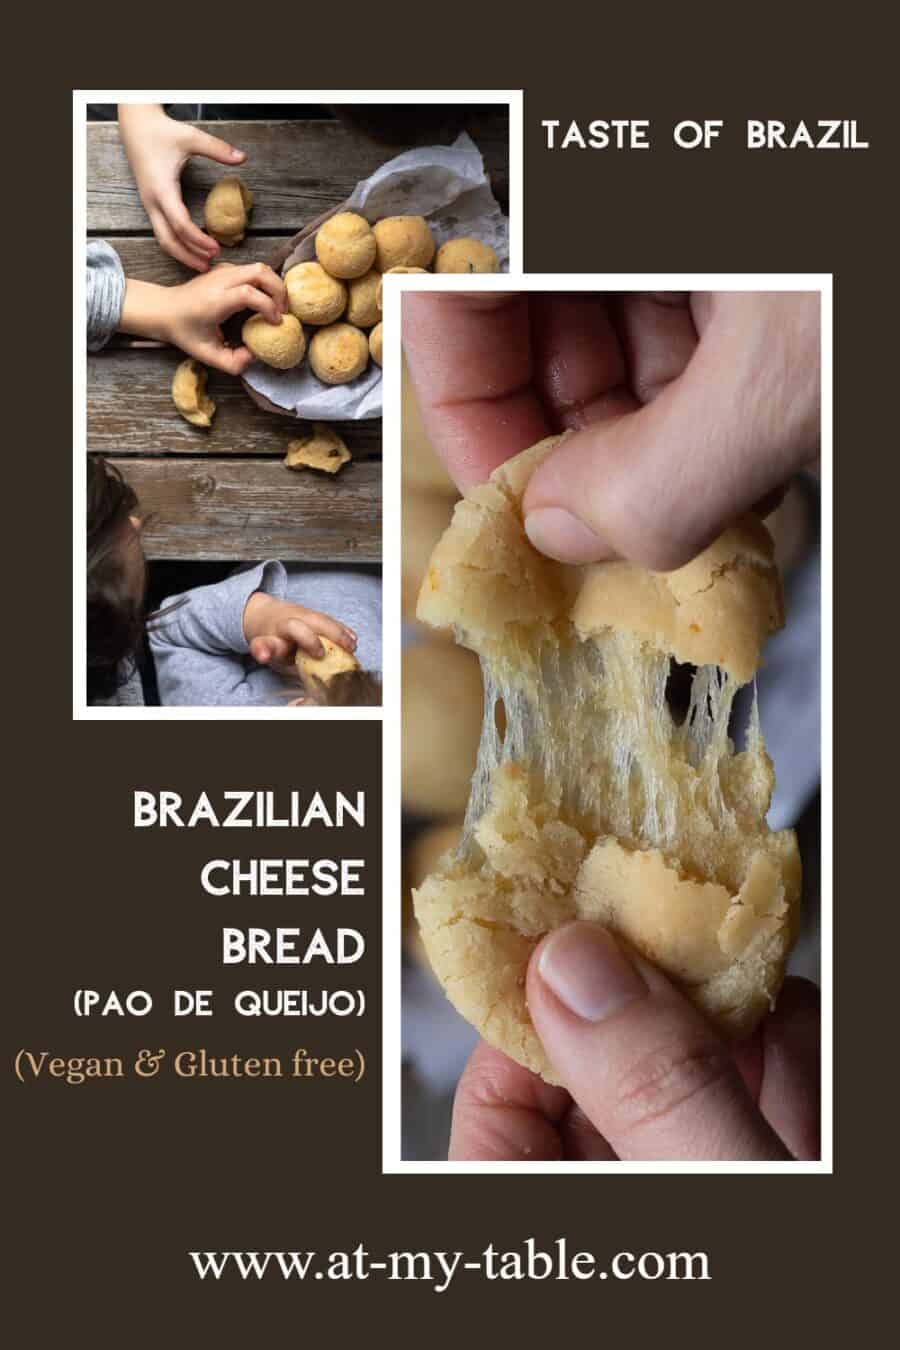 Image of gluten free and vegan pao de Queijo with text overlay. Photos show the Brazilian cheese bread being pulled apart and shared by kids on a wodde table